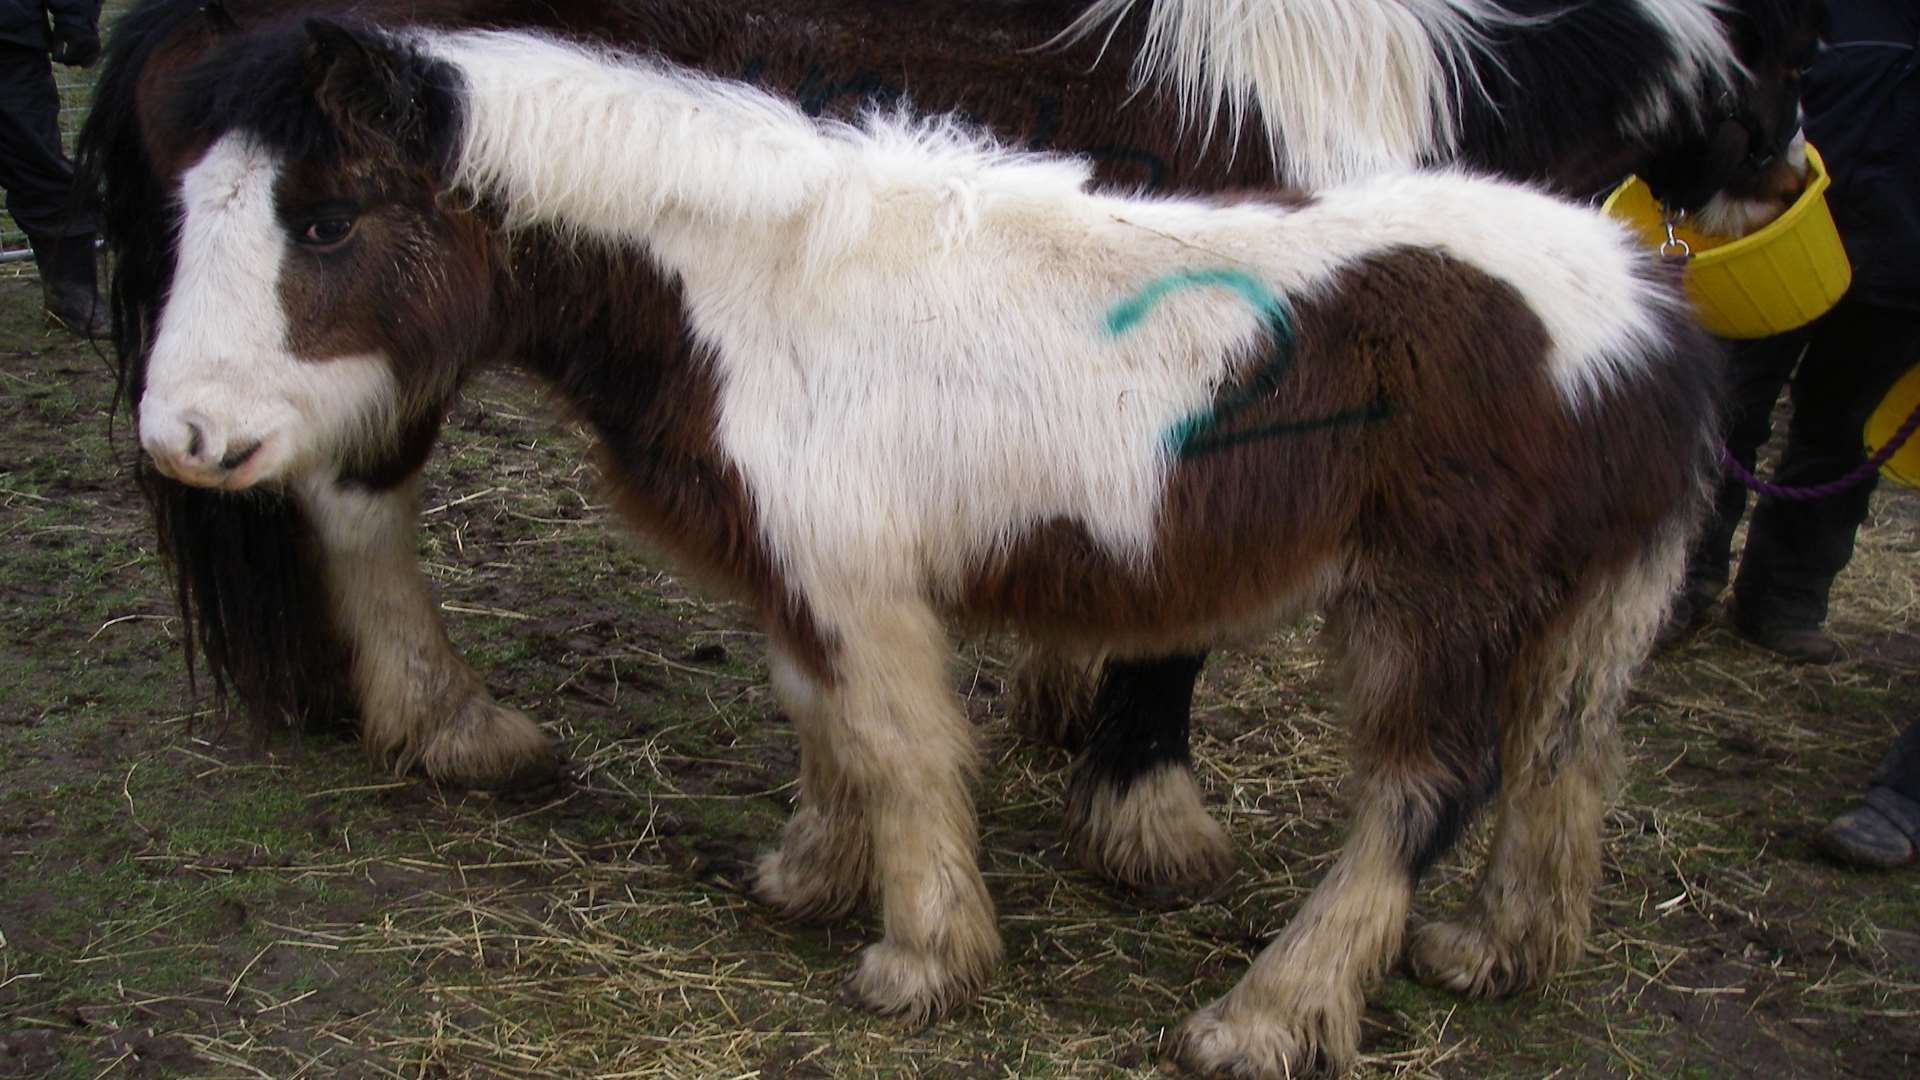 Four people were banned from keeping horses after animals were found in horrifying conditions at South Ash Road in Sevenoaks. Pic: RSPCA